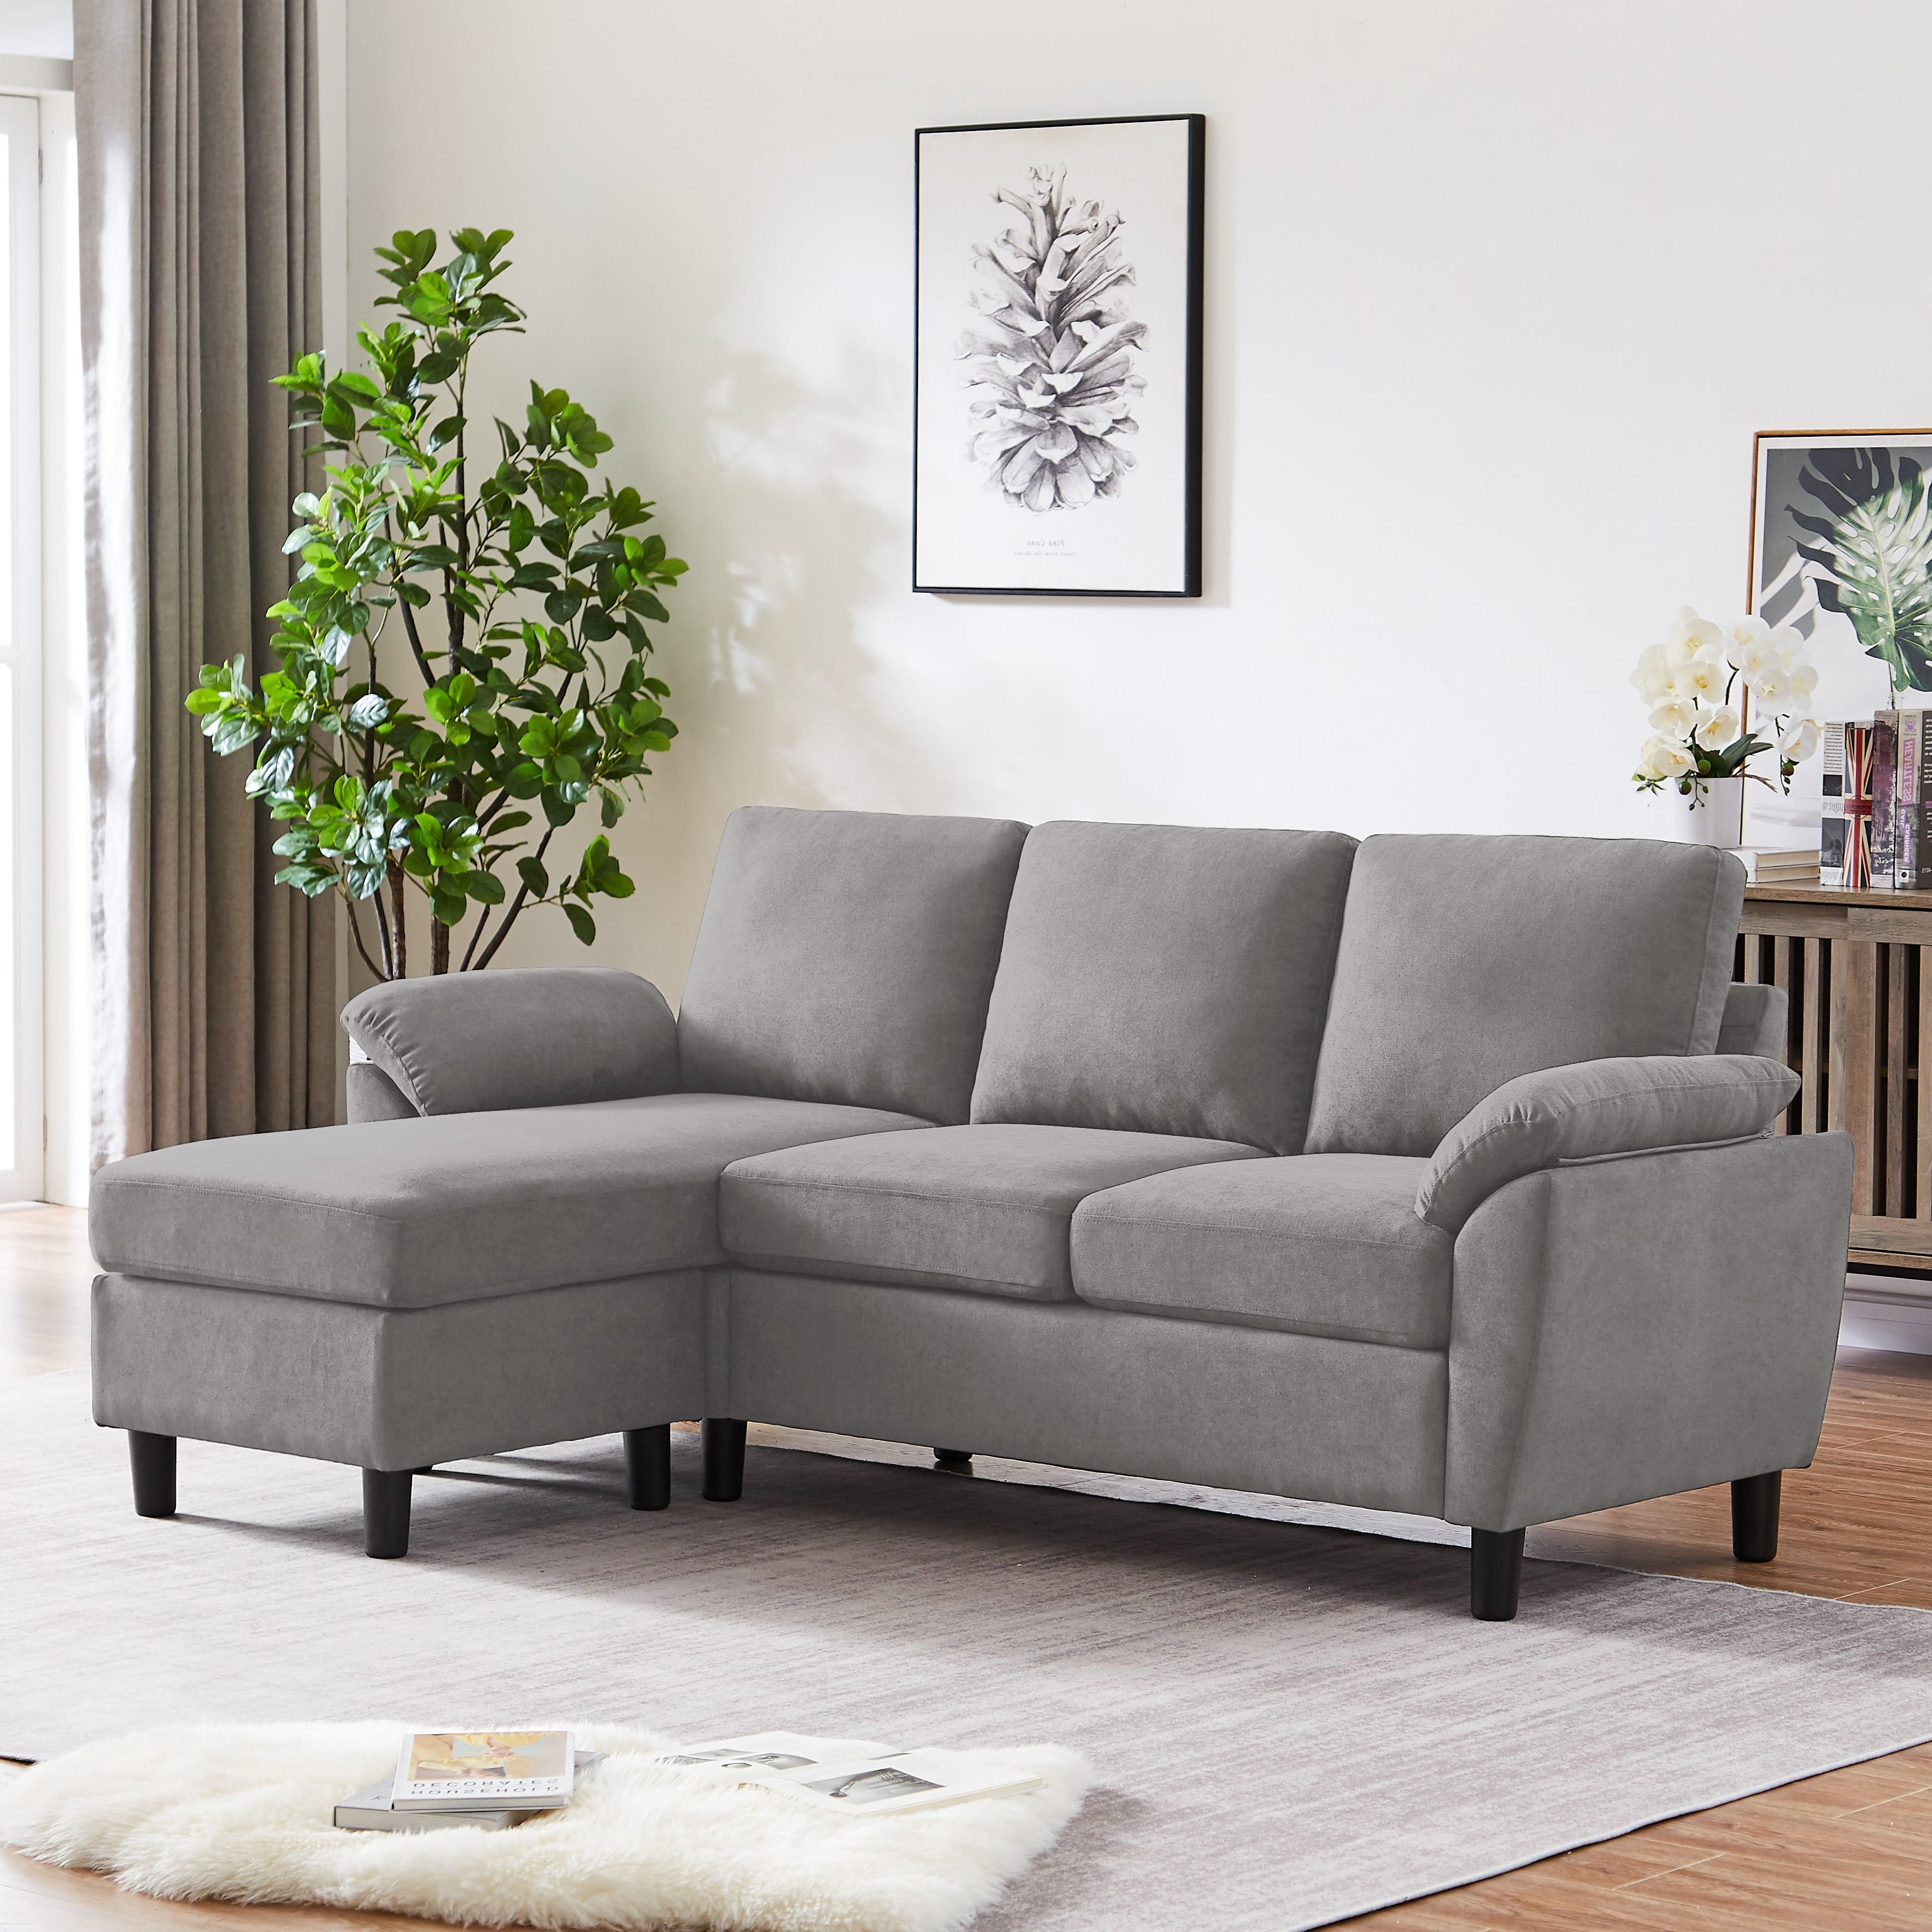 Jarenie Modern Fabric L Shapped Sofa Sectional Couches For Living Room Convertible  Sofa With Matching Chaise For Office, Apartment, Studio – Walmart Regarding Convertible Sofa With Matching Chaise (View 3 of 20)